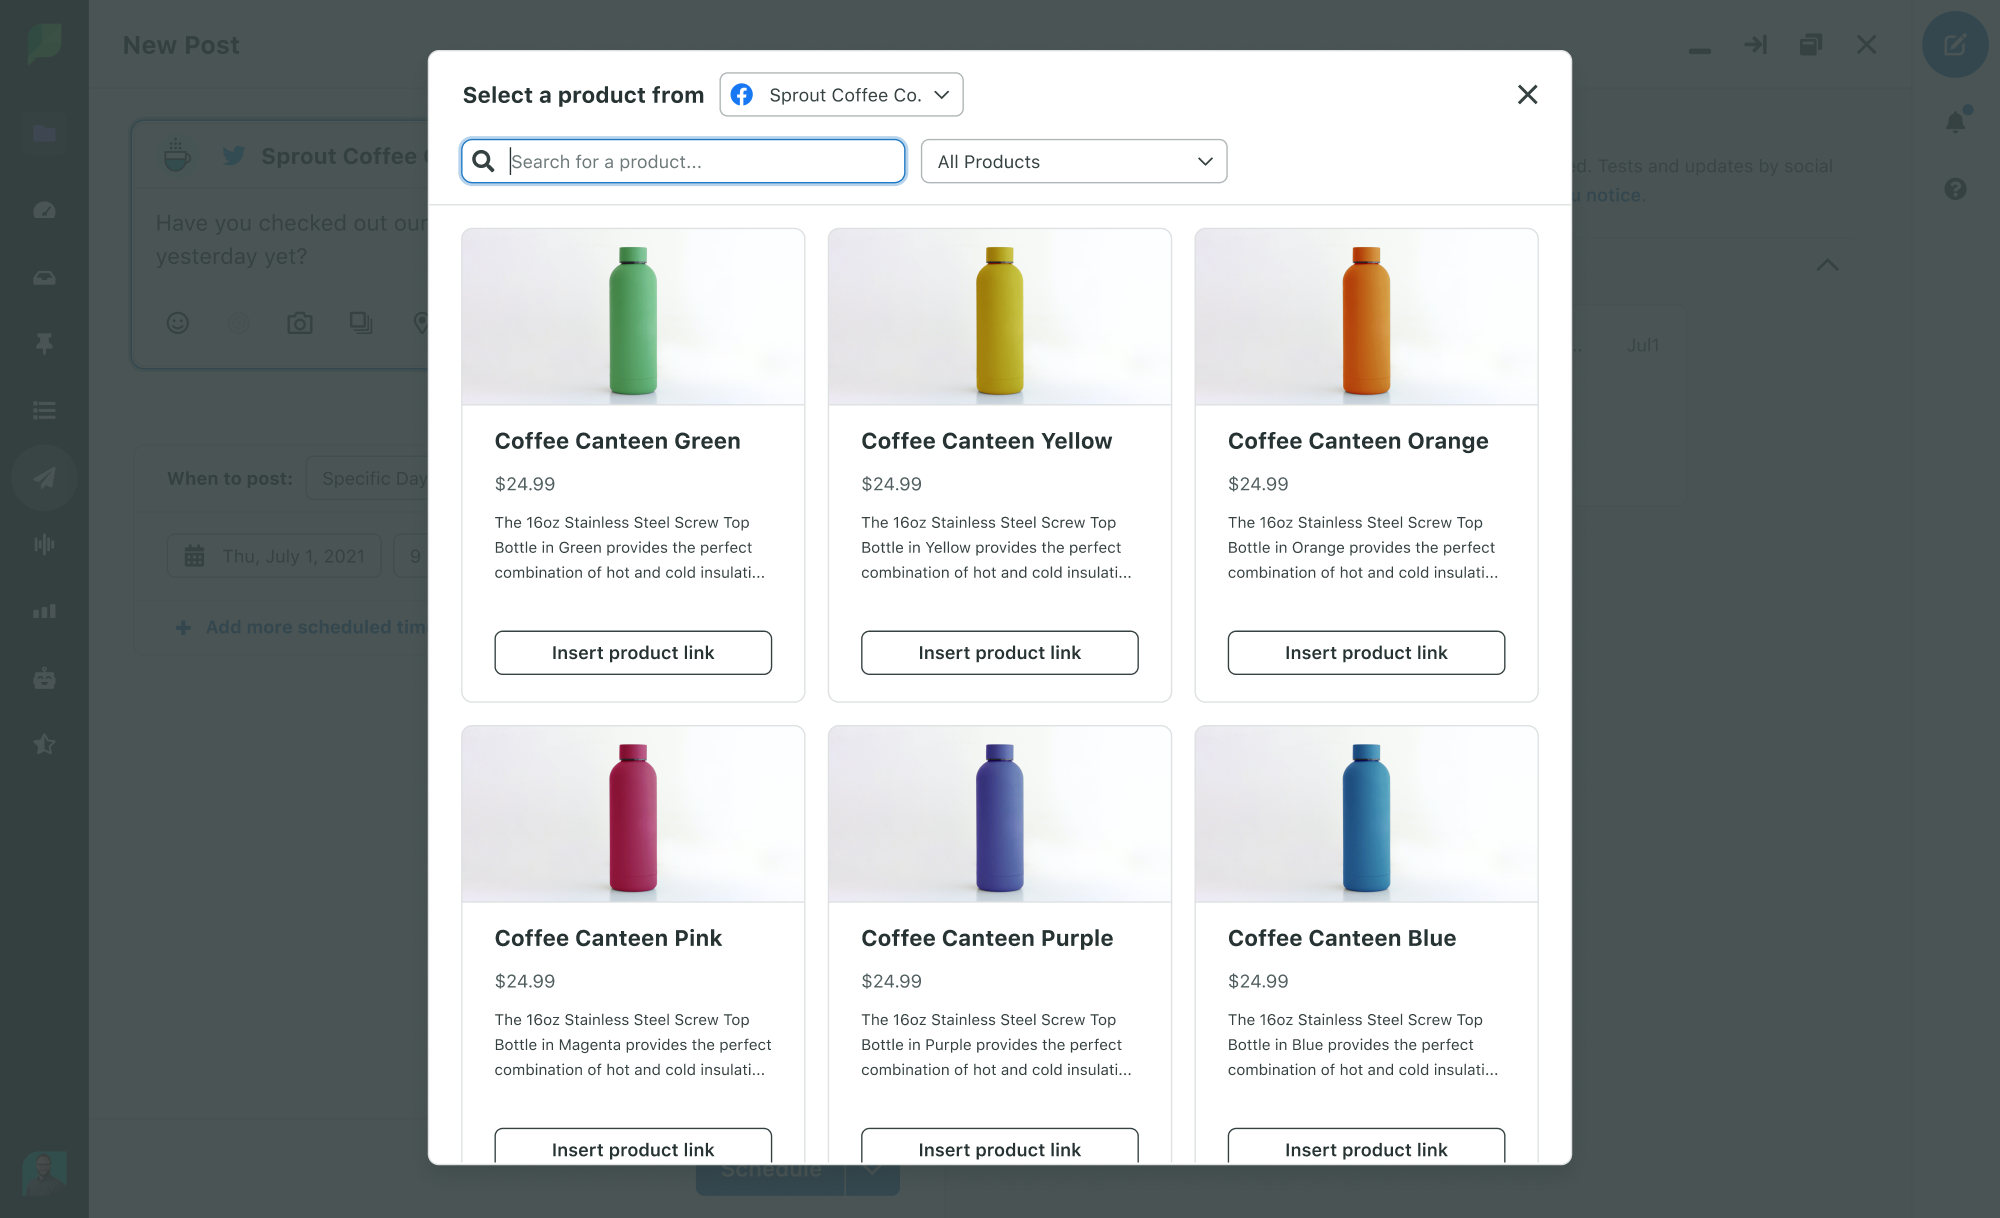 Your Facebook Shops product catalog is available in Sprout’s Compose window where you can filter, search, find product and pricing details, and insert product links directly into a new post.